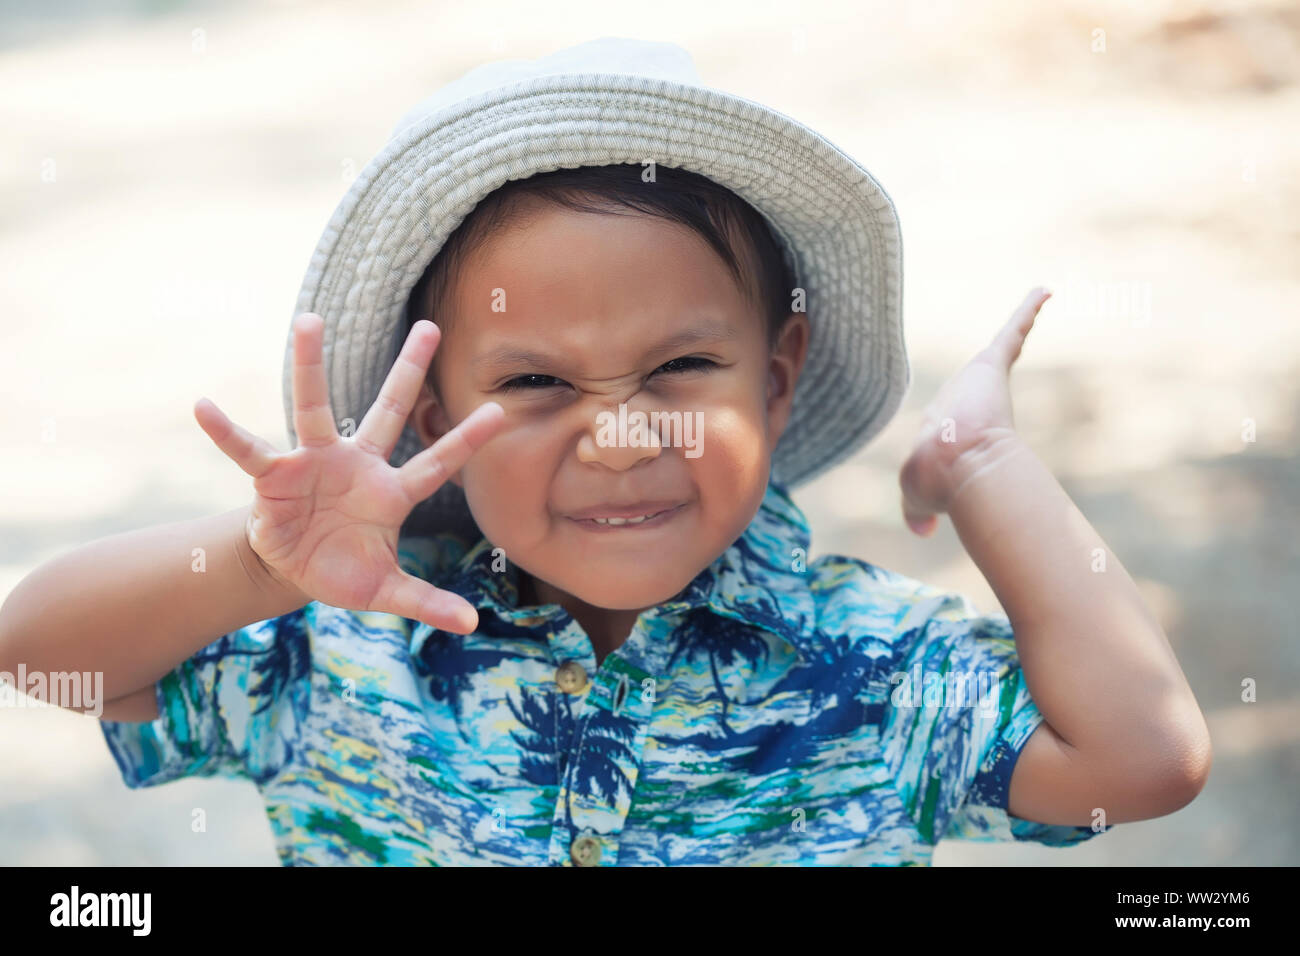 A happy and energetic little boy making a funny facial expression and waving with his hands to say hello. Stock Photo